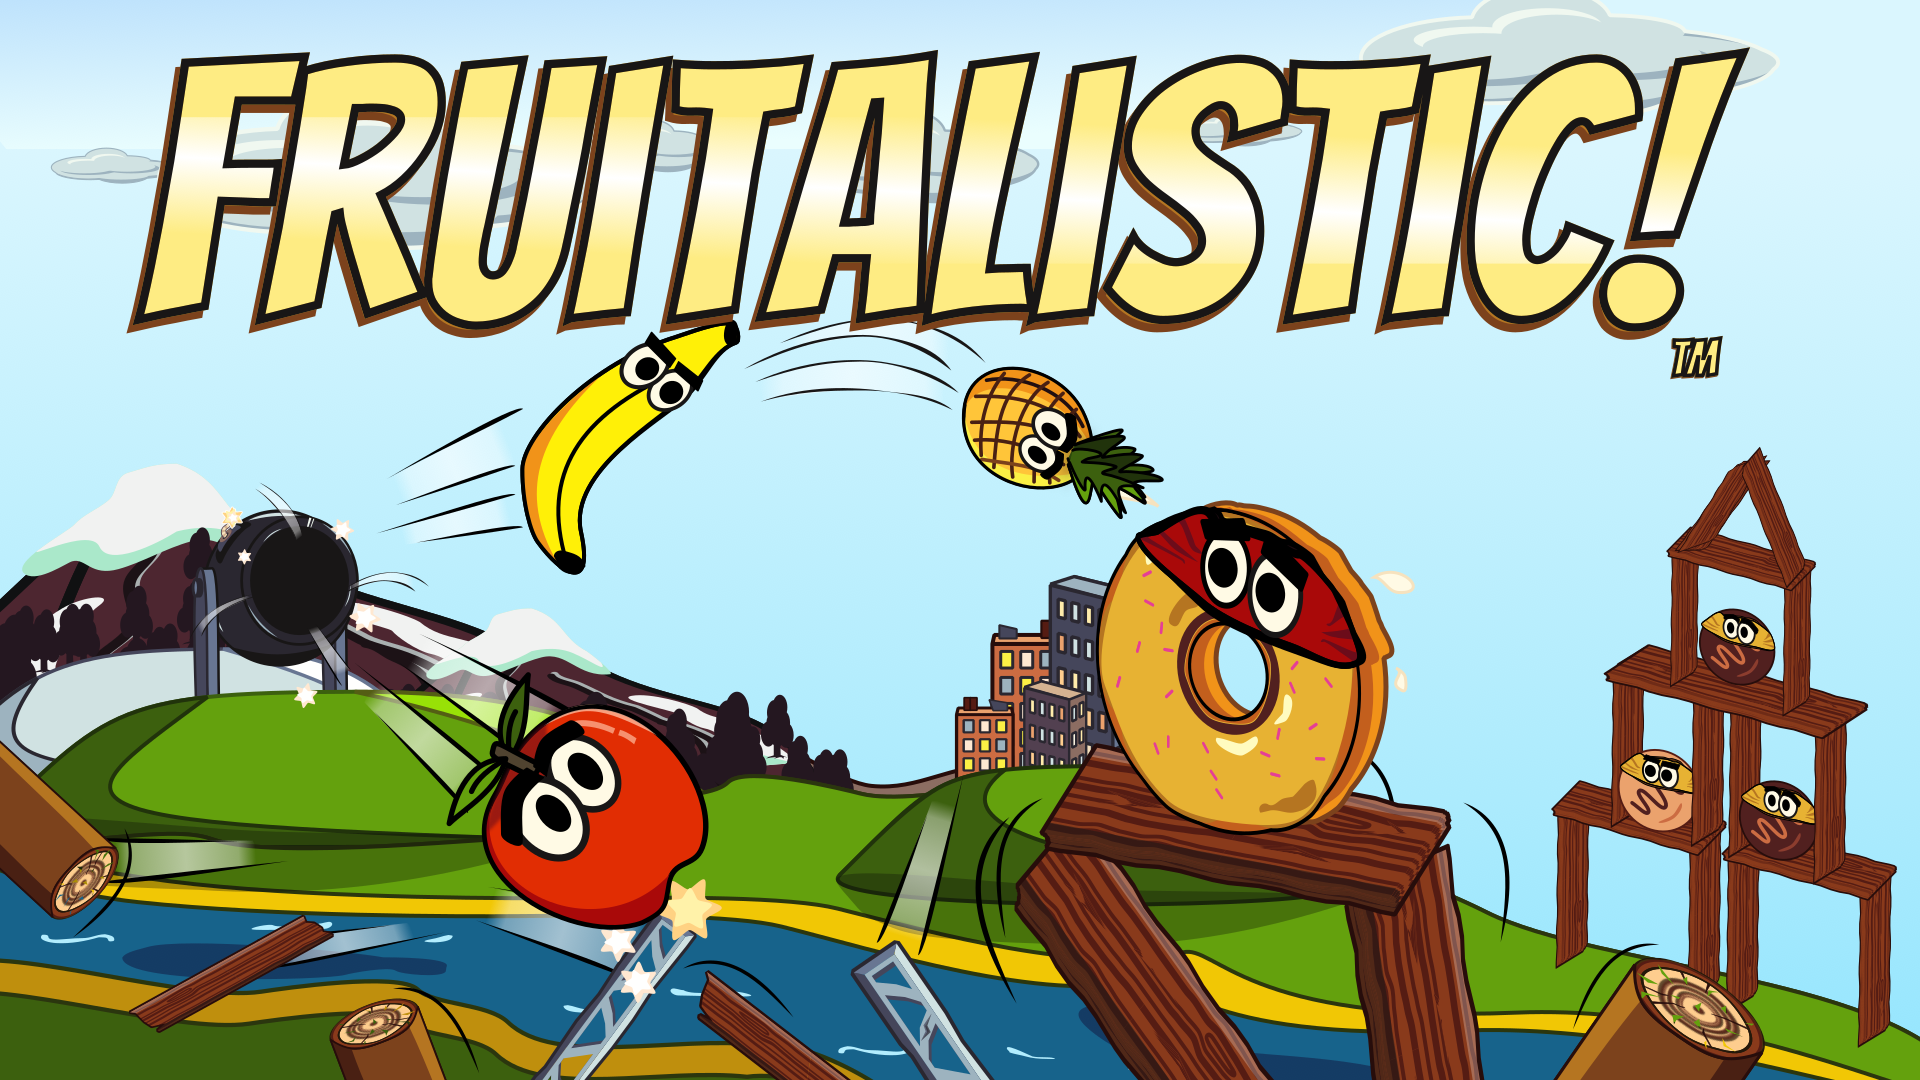 Fruitalistic! Main logo with background